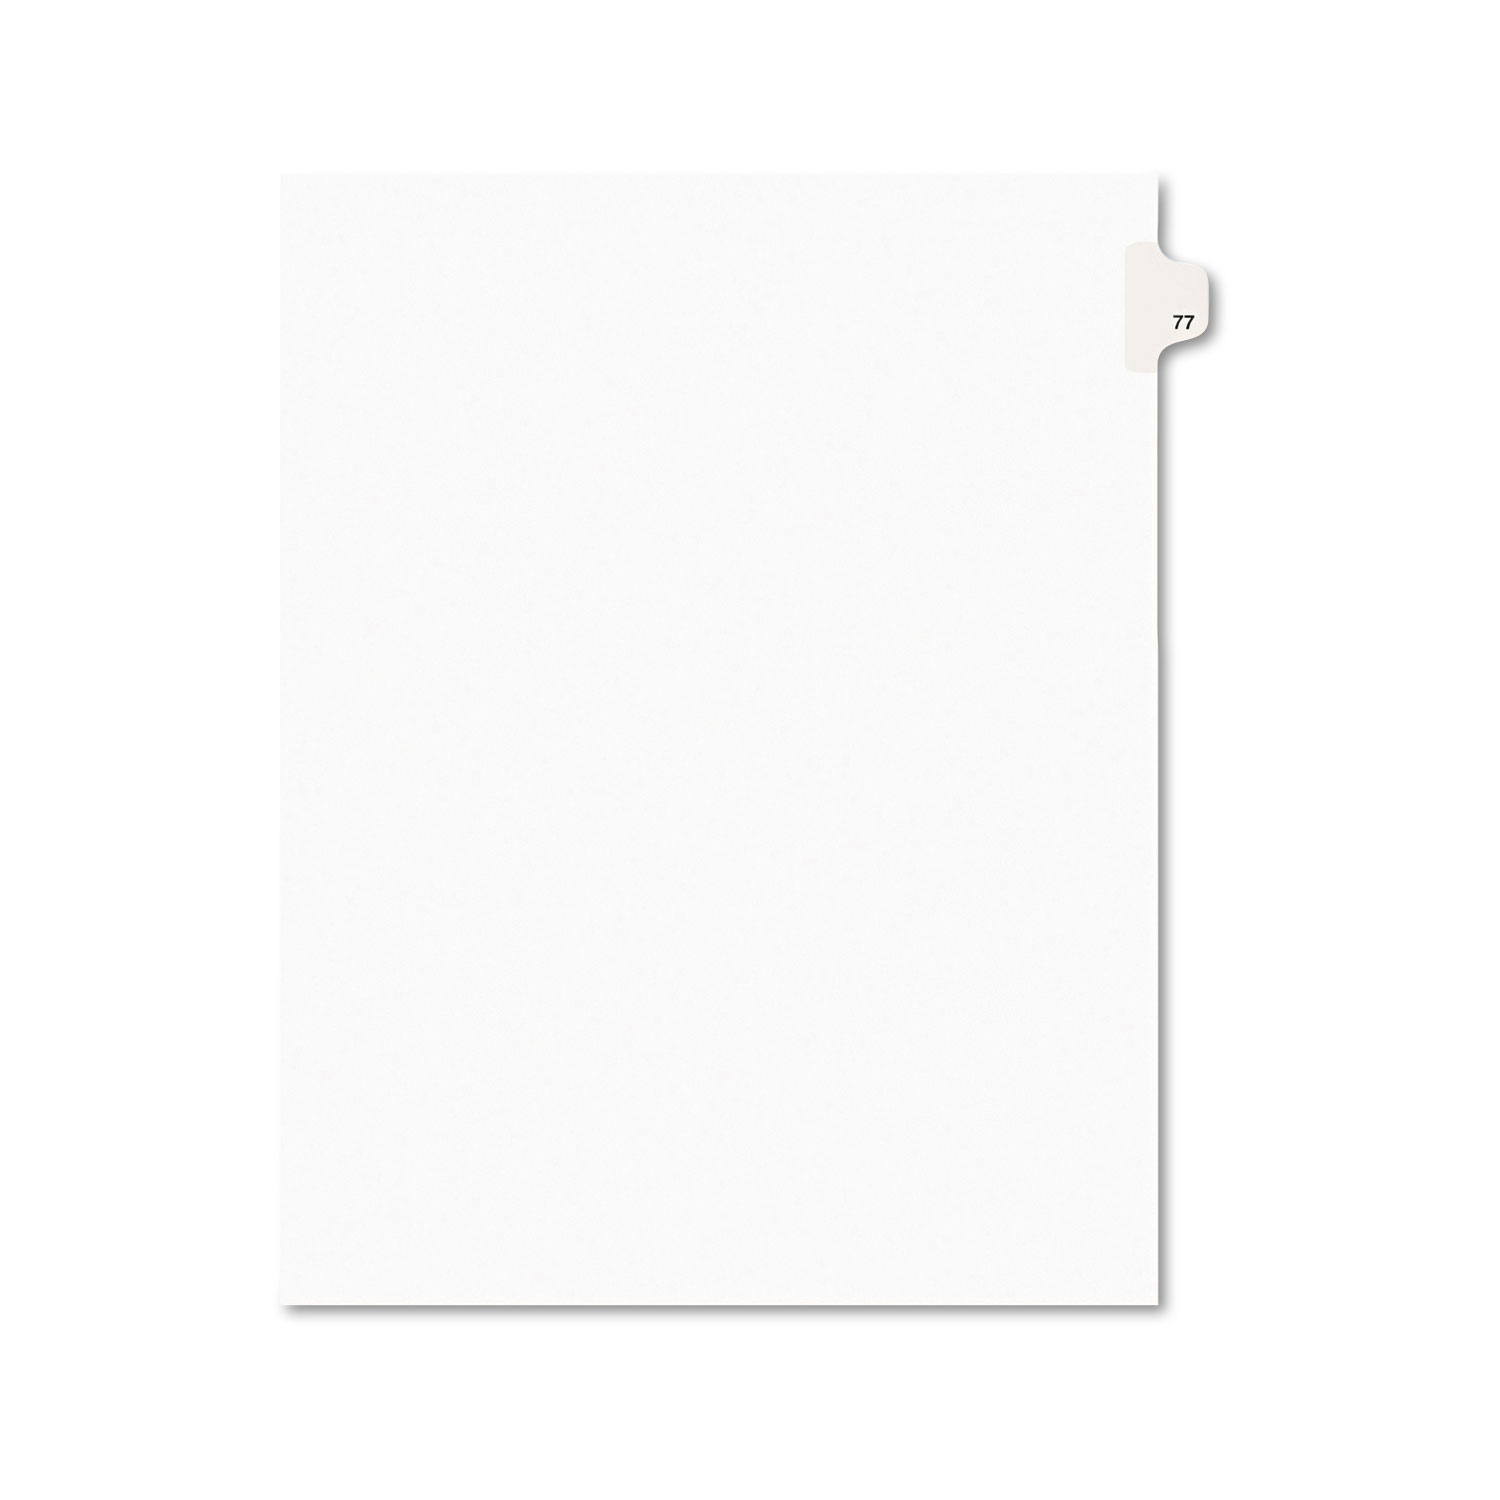  Avery 01077 Preprinted Legal Exhibit Side Tab Index Dividers, Avery Style, 10-Tab, 77, 11 x 8.5, White, 25/Pack (AVE01077) 